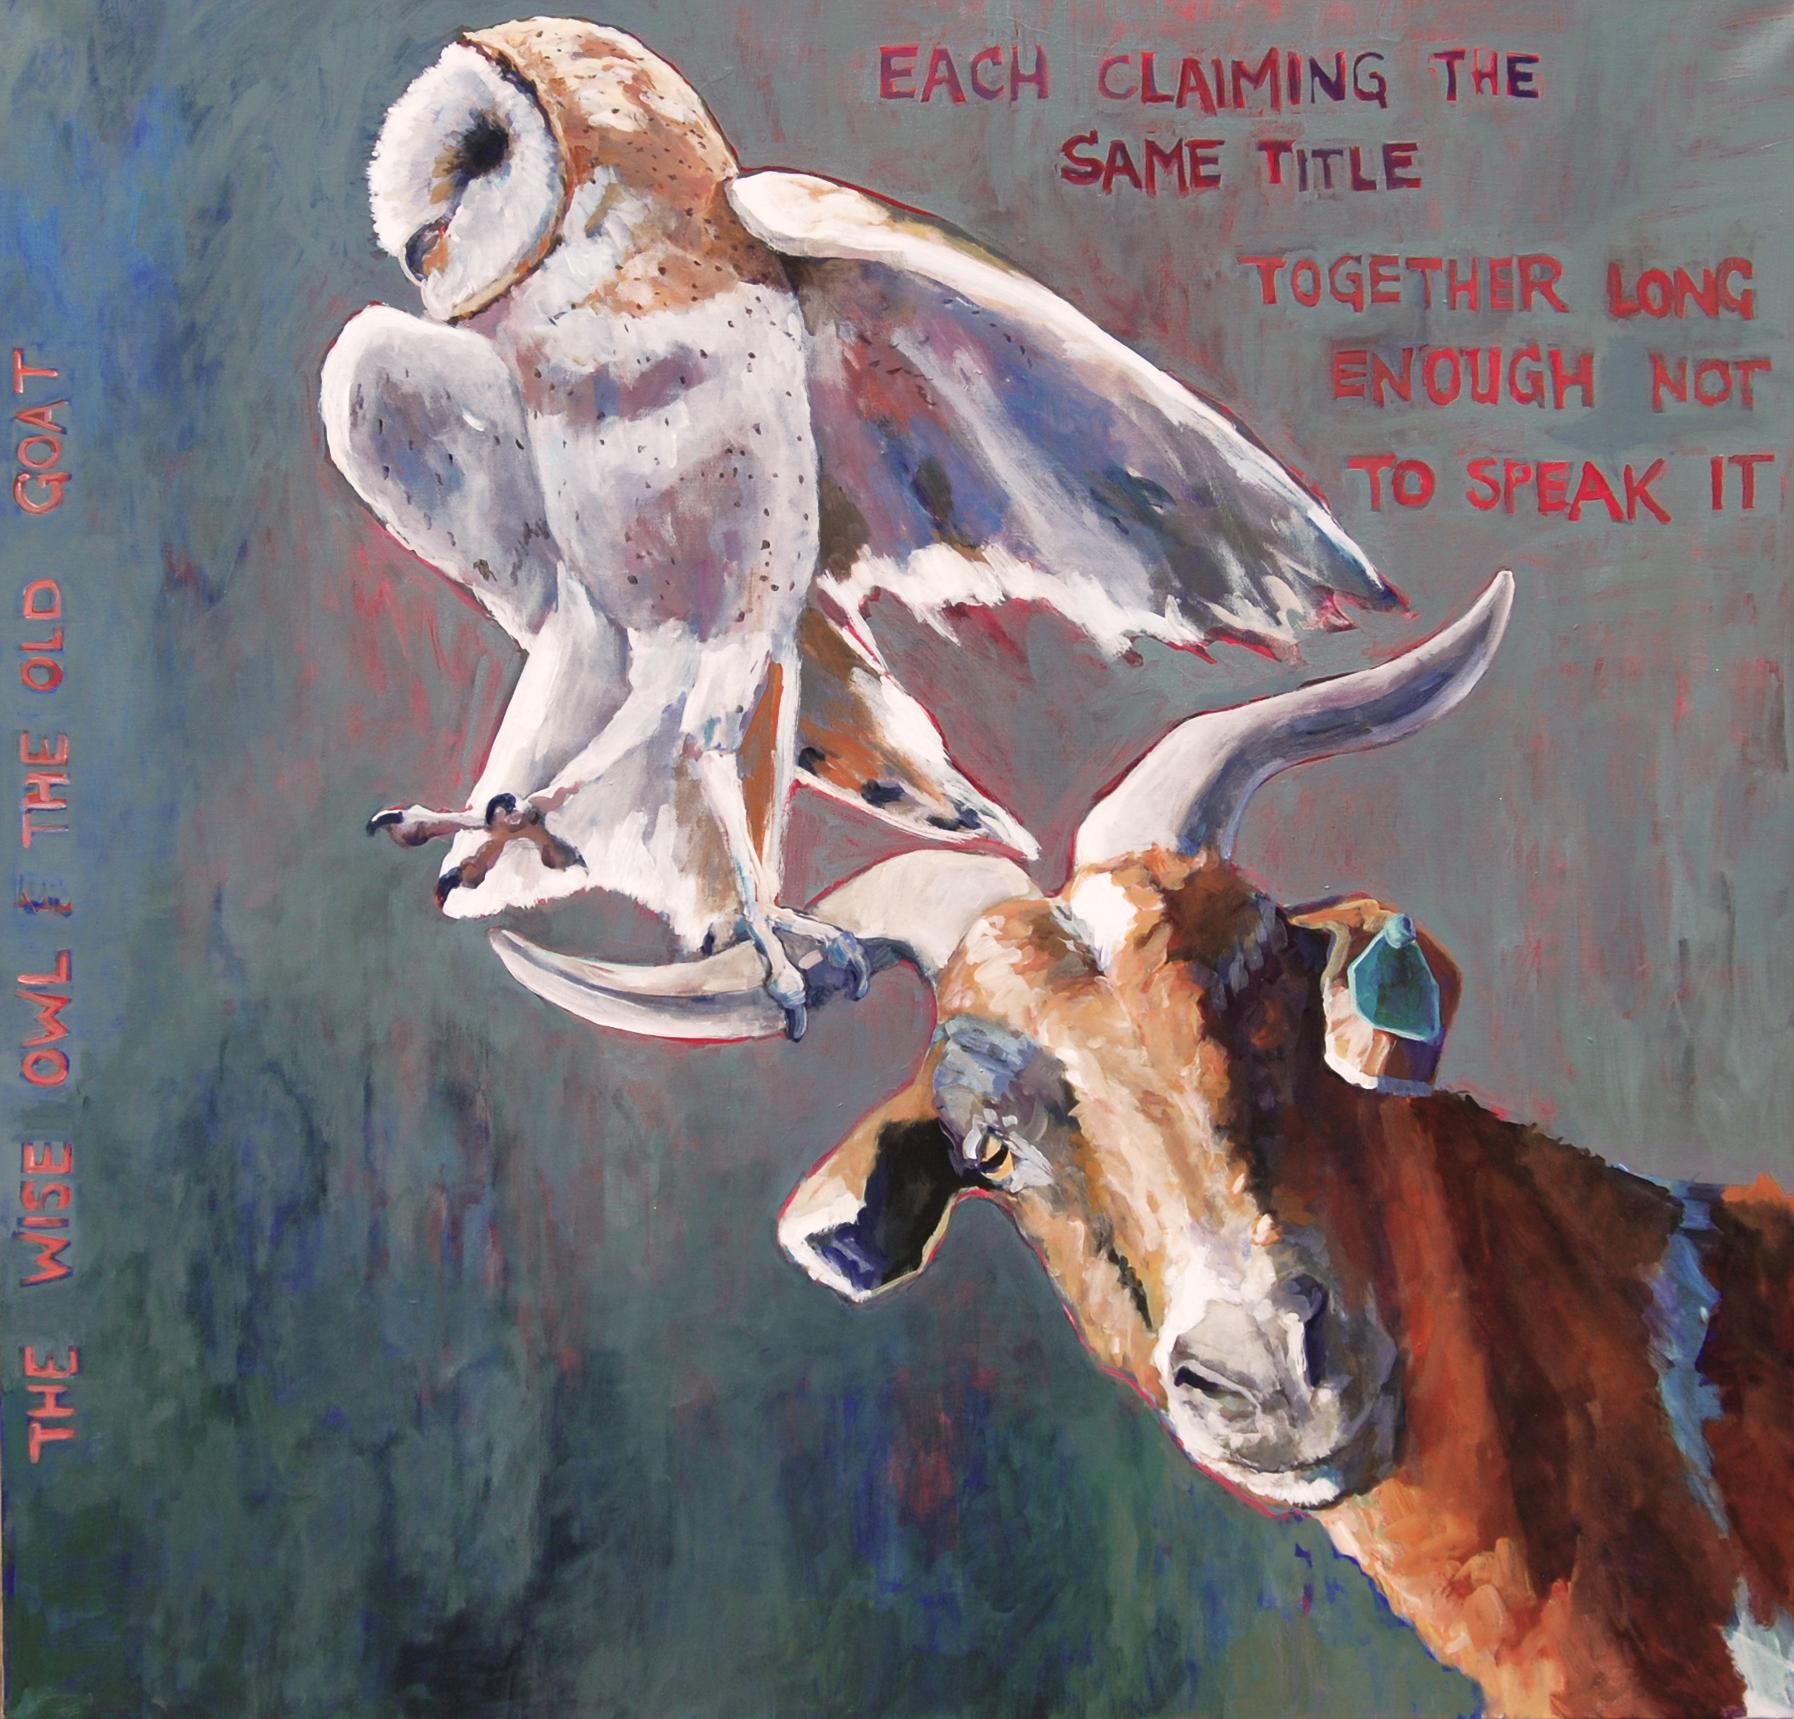 Heather Foster Animal Painting - The Wise Owl & the Old Goat (Contemporary animal portrait with whimsical verse)